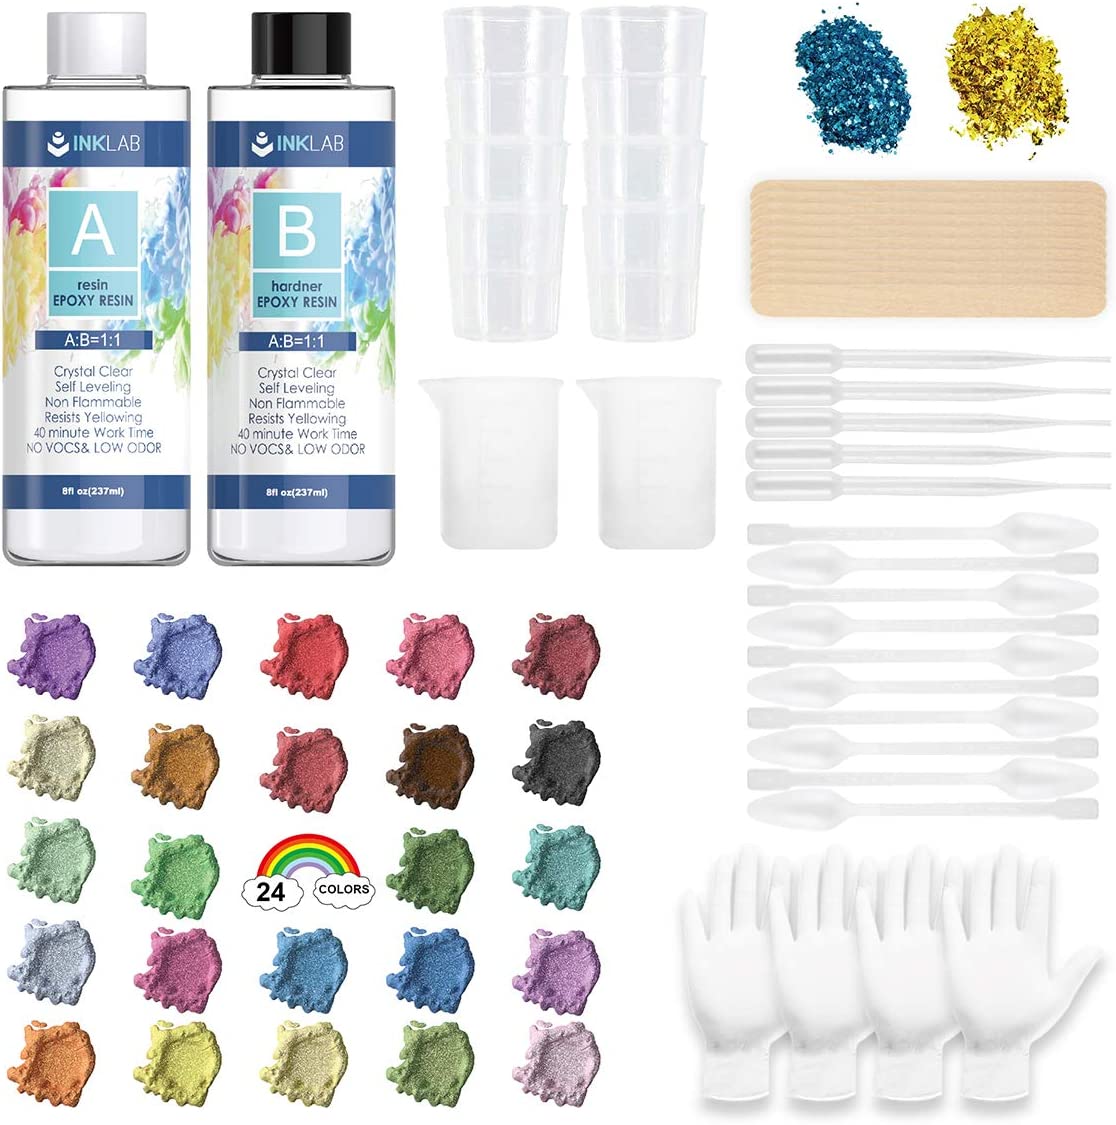 Epoxy Resin Crystal Clear Casting Kit 16 Oz Coating Resin Starter Kit for  Beginners Jewelry Tumblers Arts Crafts, Mica Powders, Mixing Sticks,  Silicone Cups, Gloves, Pipettes